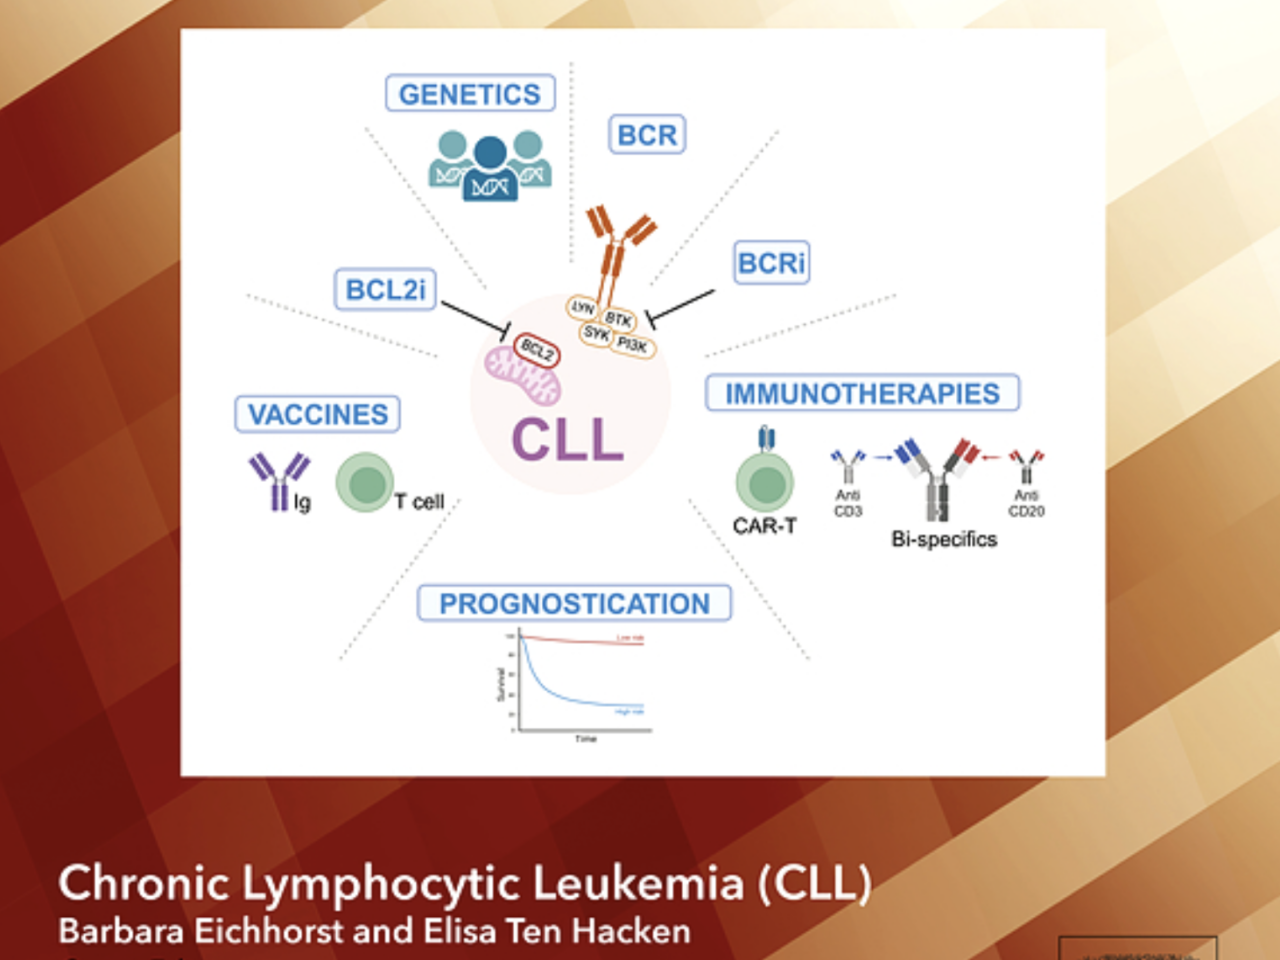 Elisa ten Hacken: Finally, the seminars in the Hematology Review Series on CLL have been published